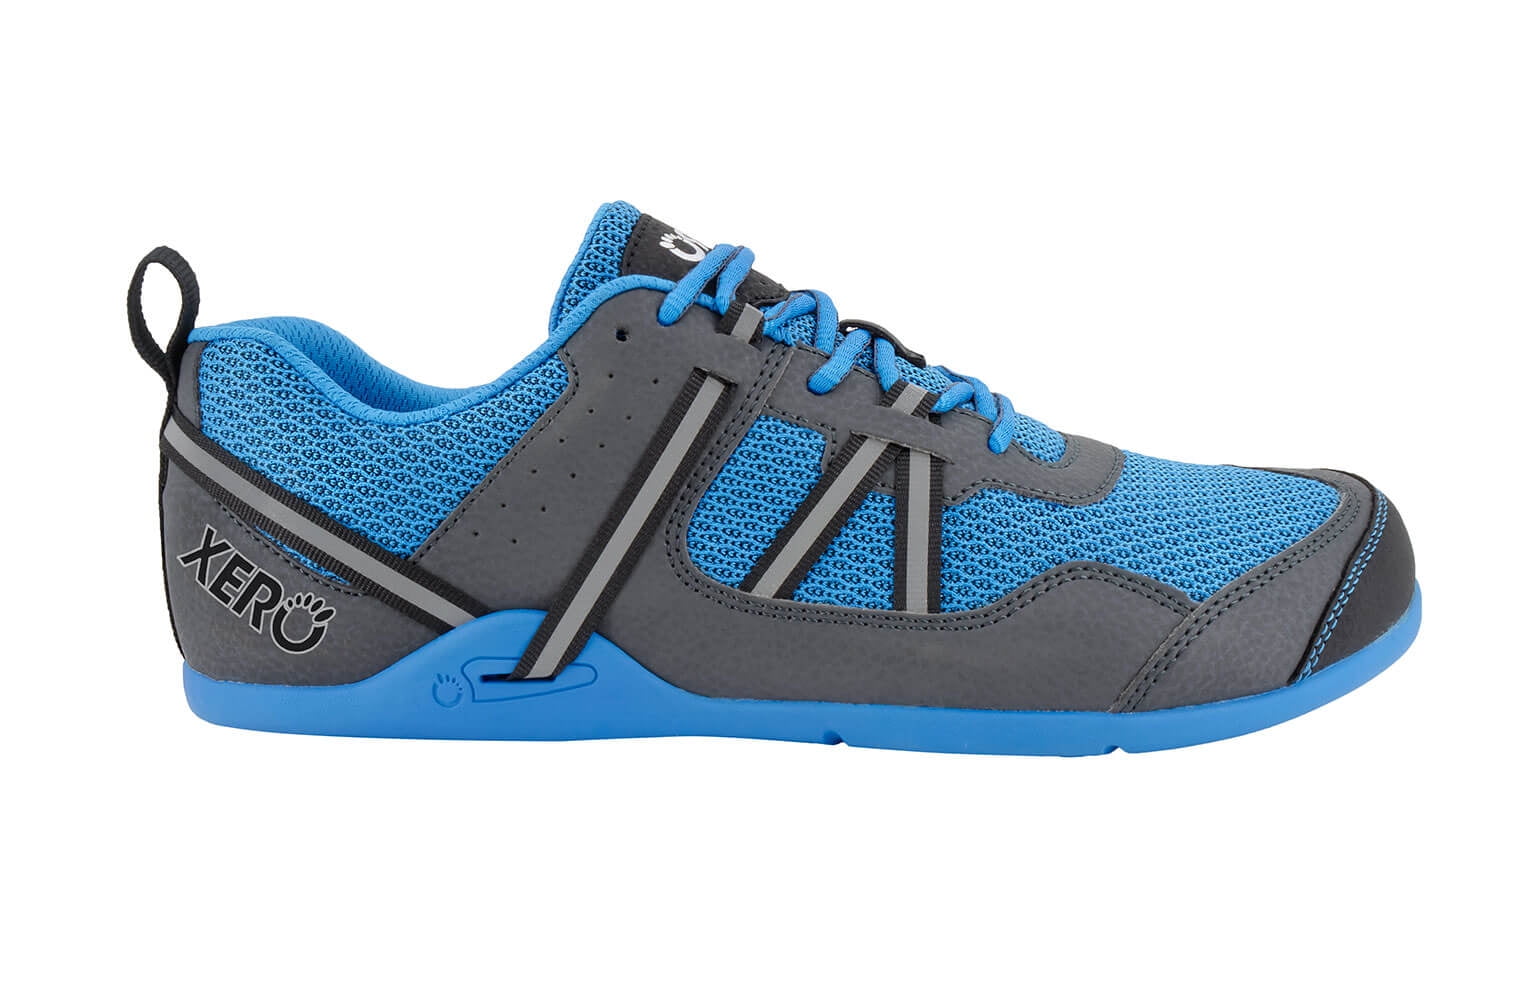 prio running and fitness shoe